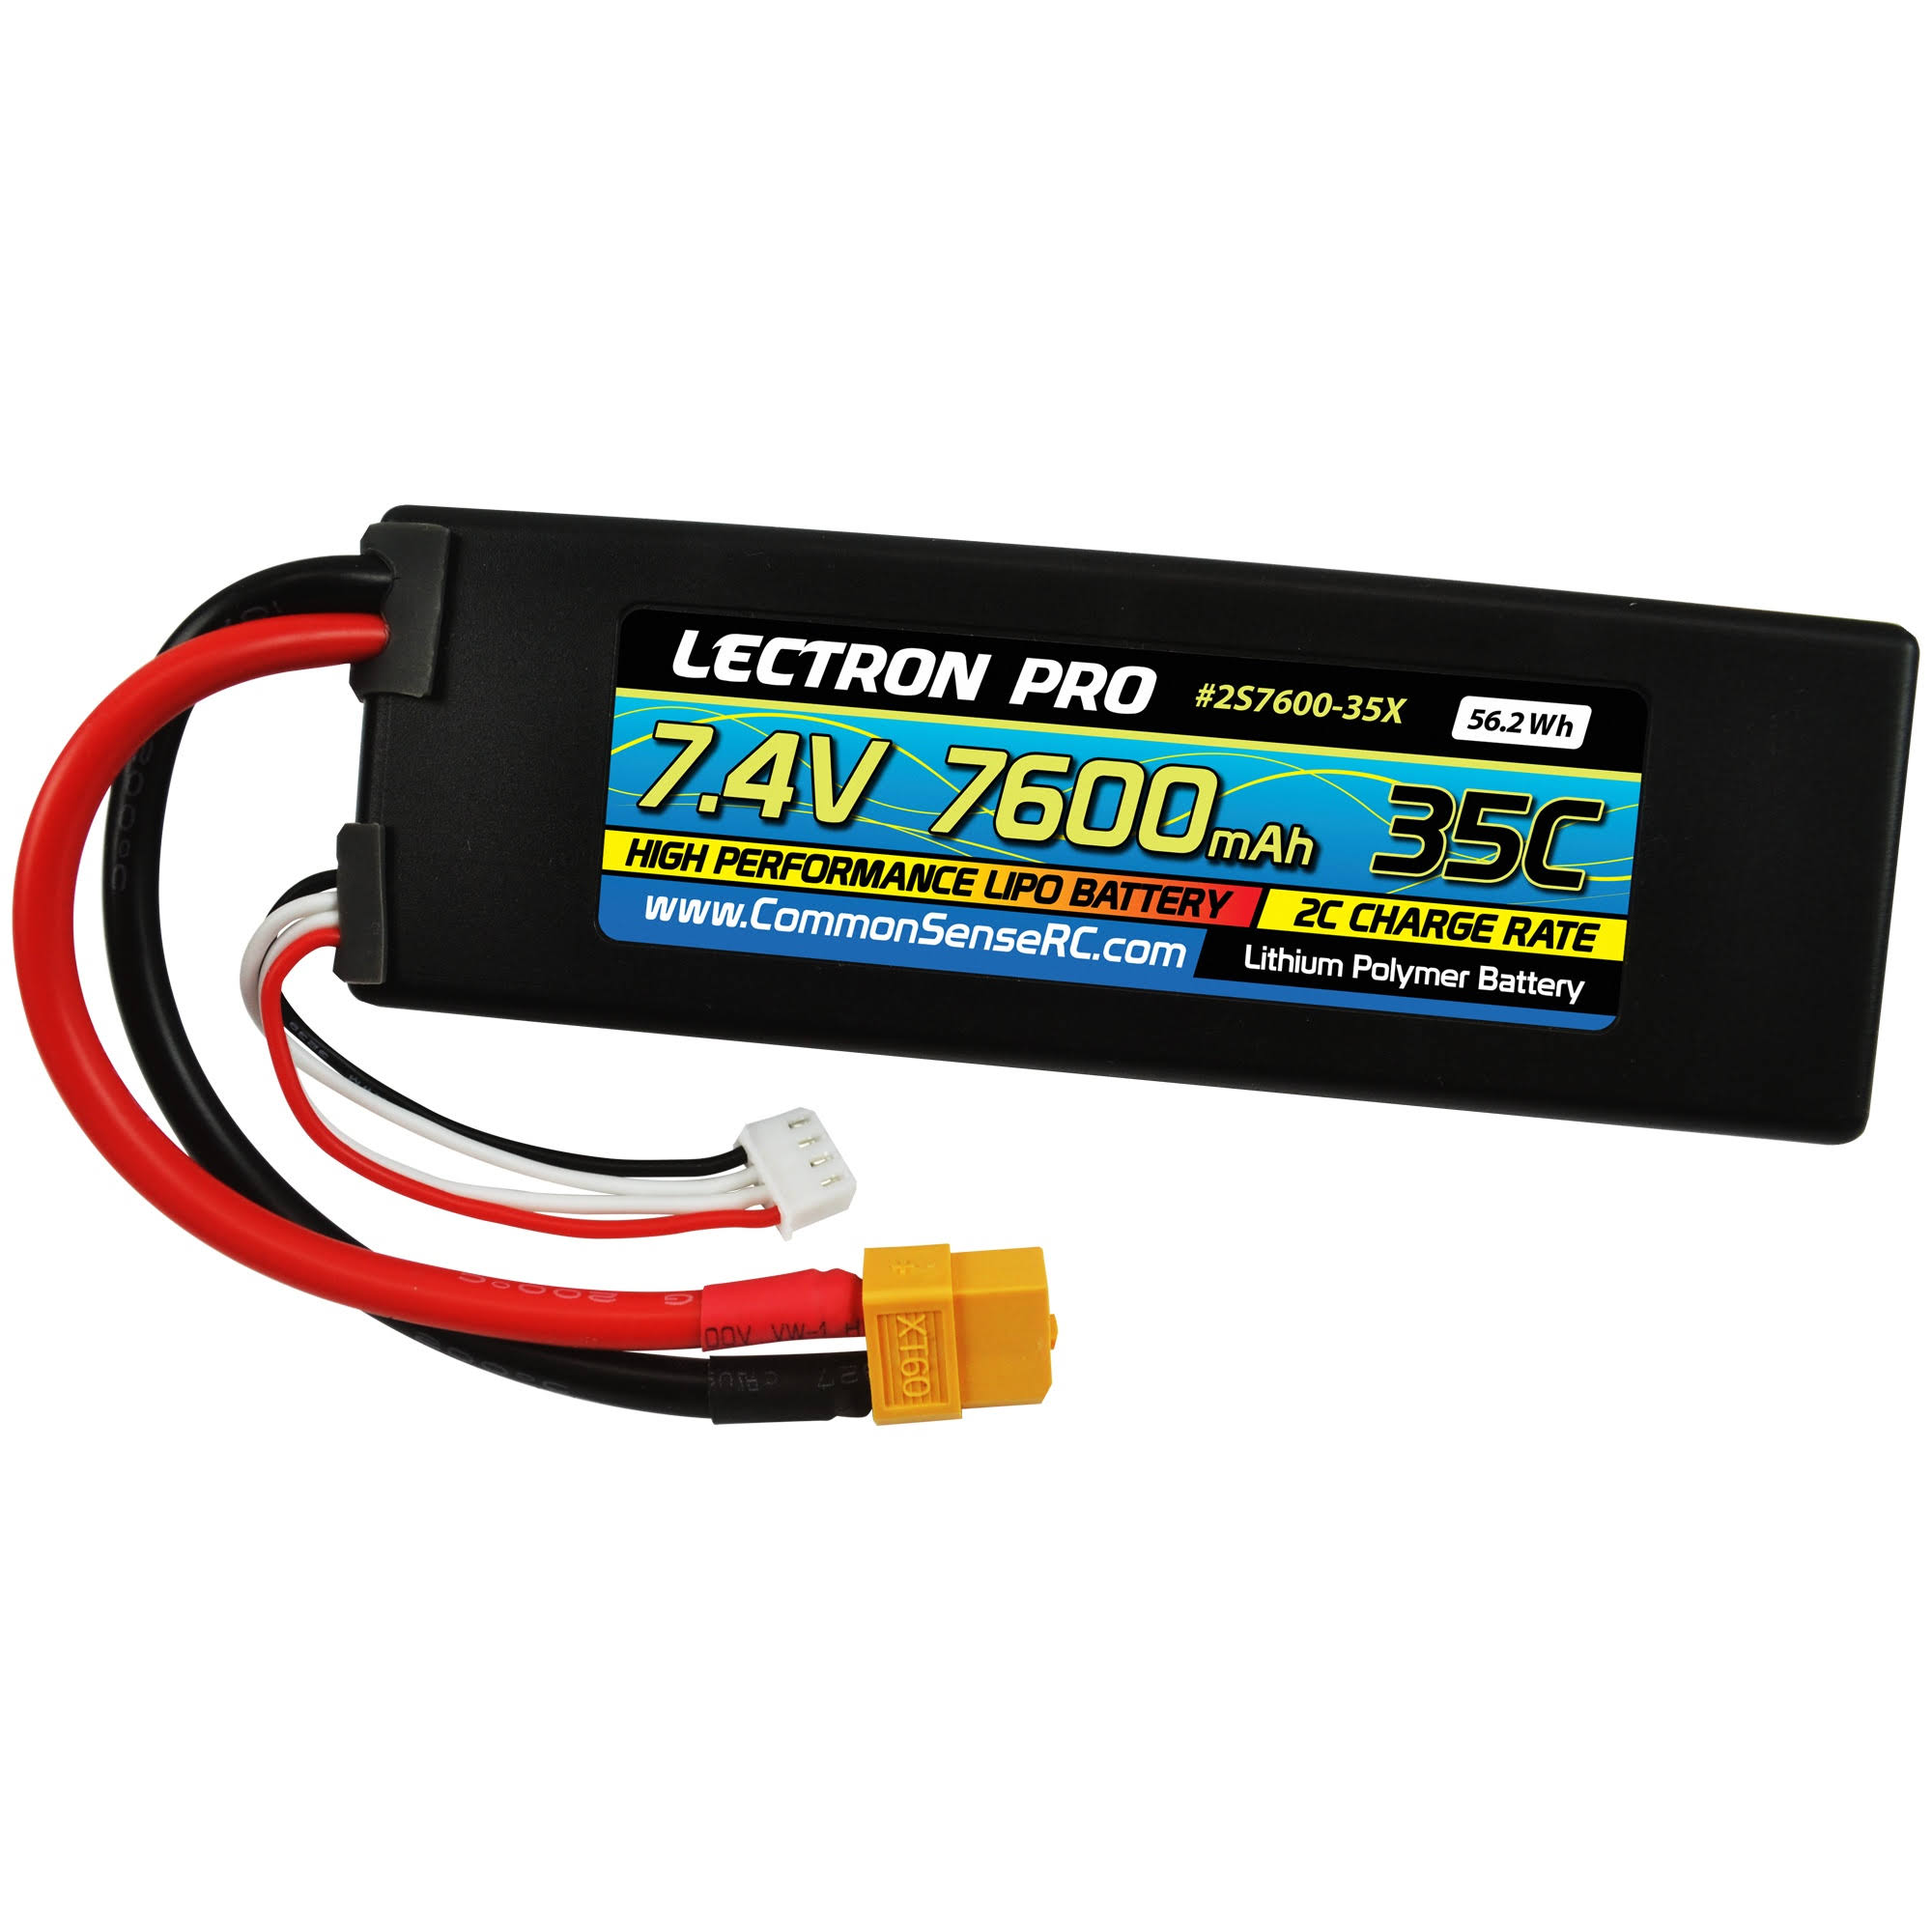 Lectron Pro 7.4V 7600mAh 35C Lipo Battery with XT60 Connector, White